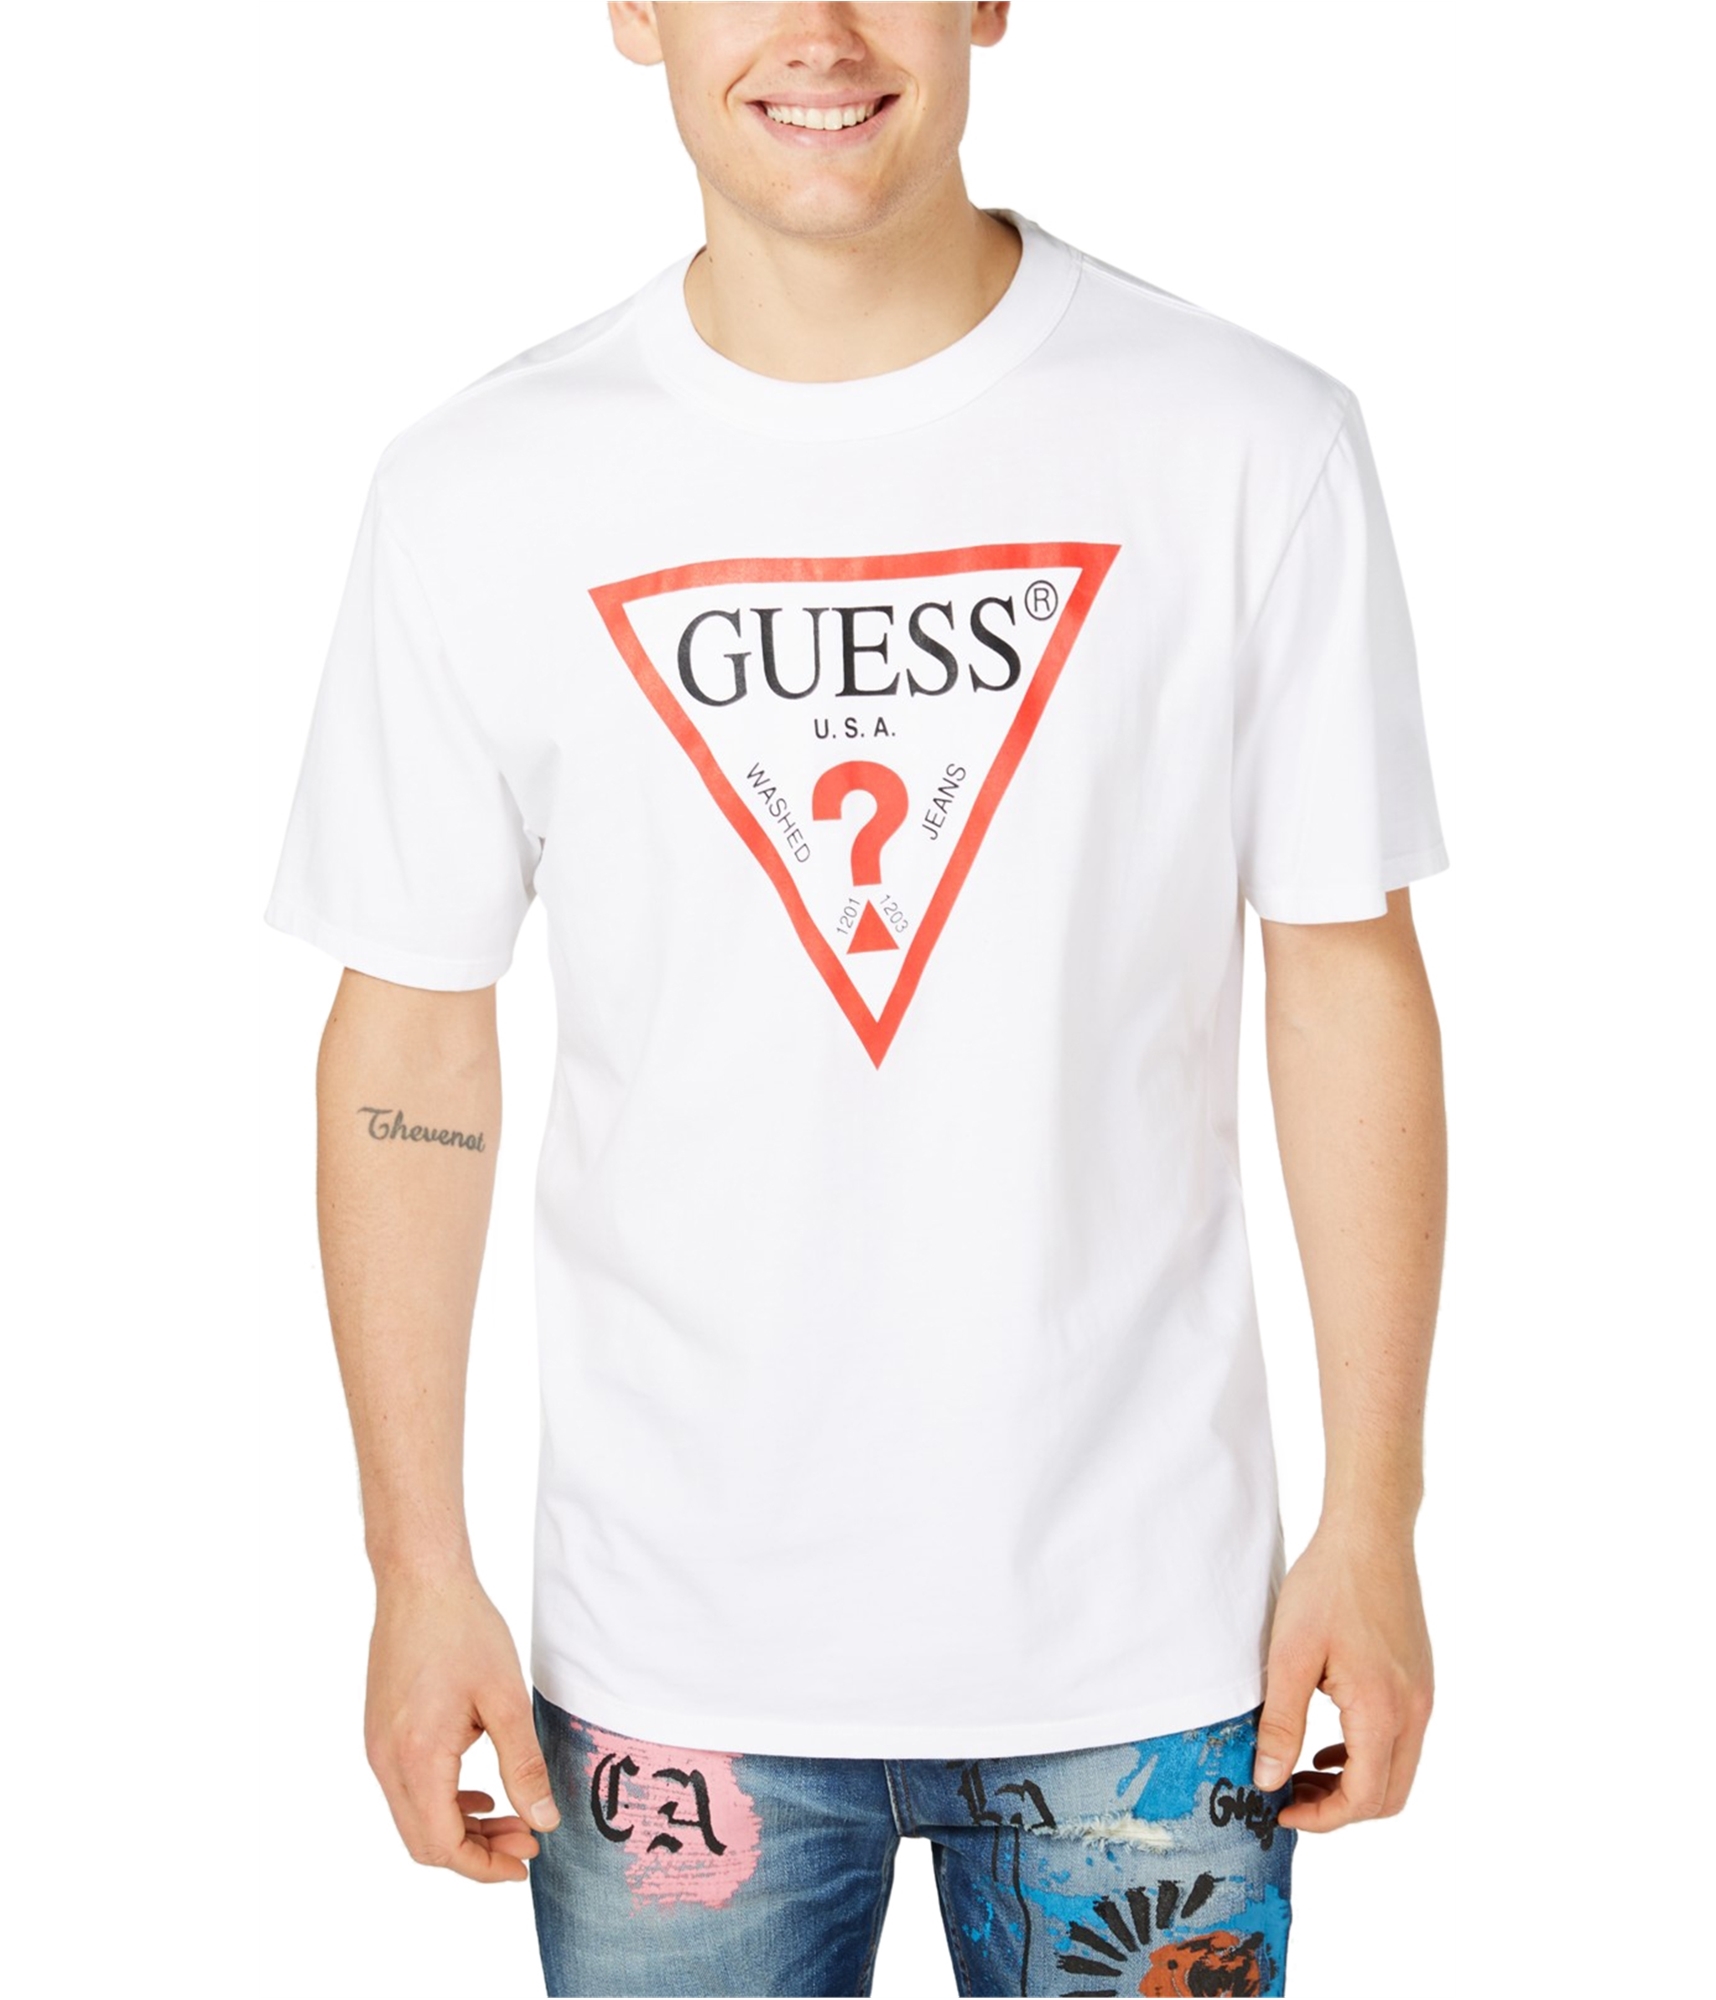 Buy Mens GUESS Triangle Logo Graphic T-Shirt Online | TagsWeekly.com, TW1